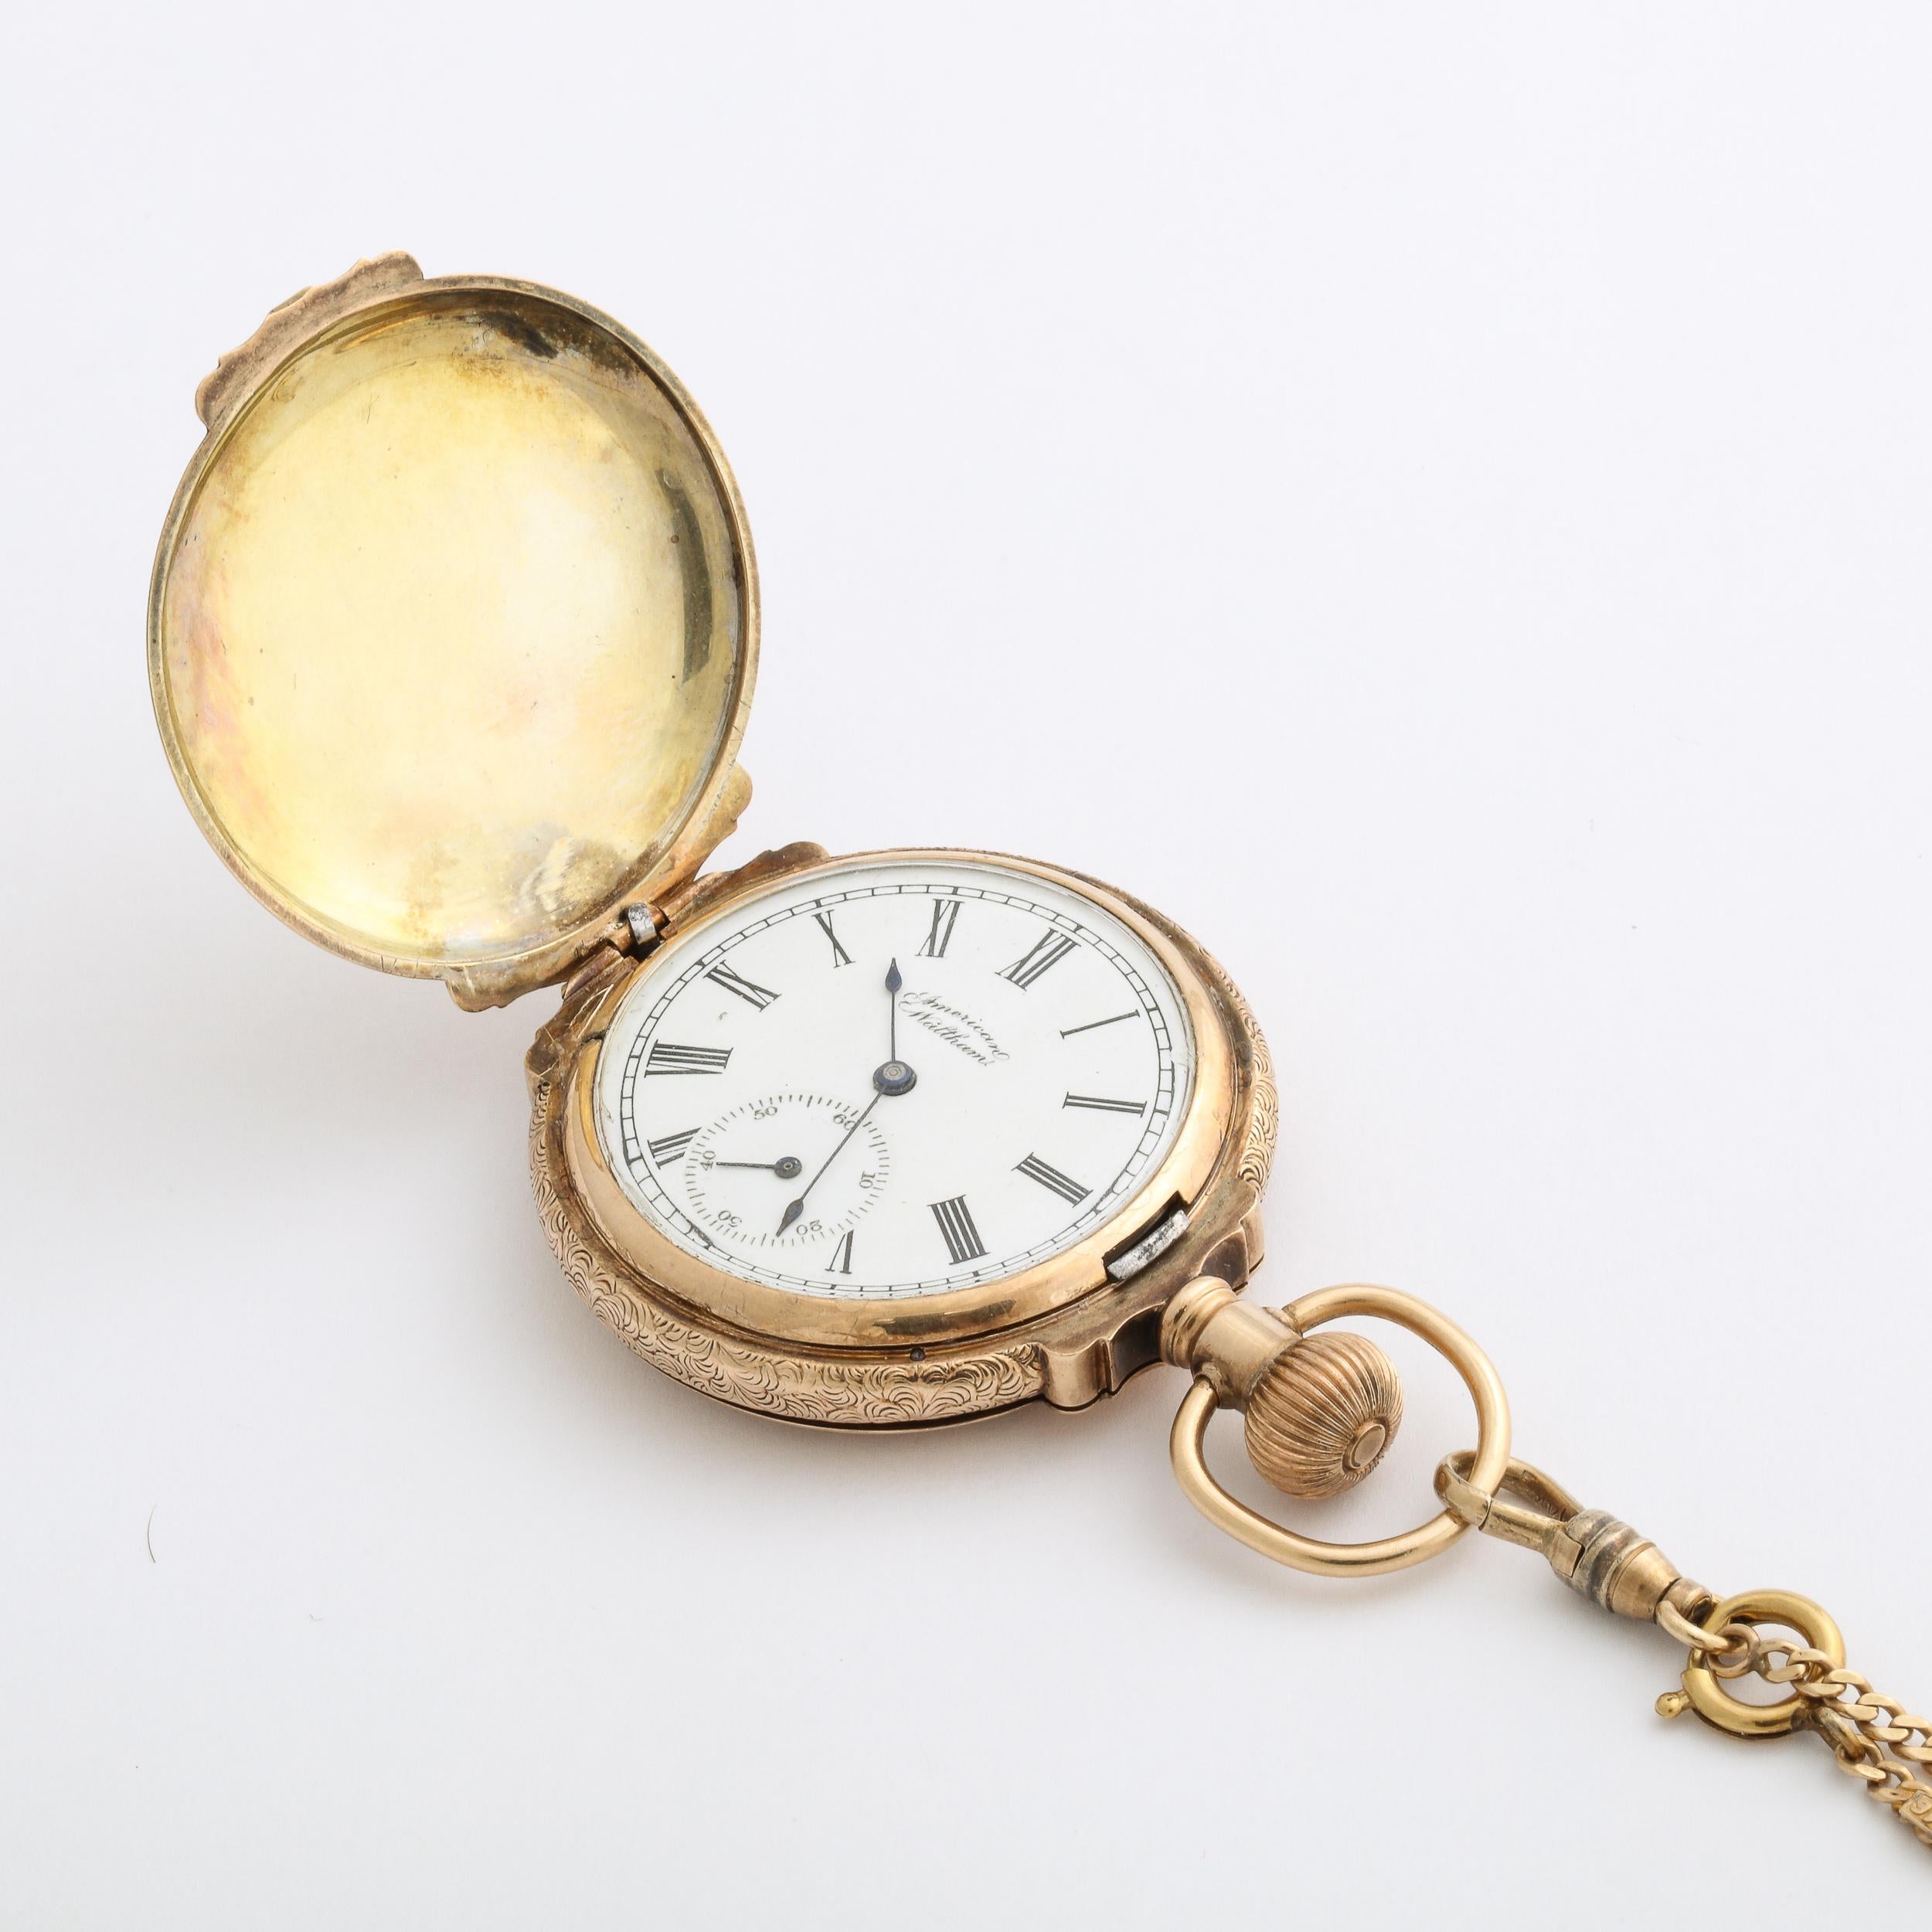 Antique 14K Yellow Gold Lady's Hunting Watch W/ Chain  by Waltham Watch Co. 1888 For Sale 10